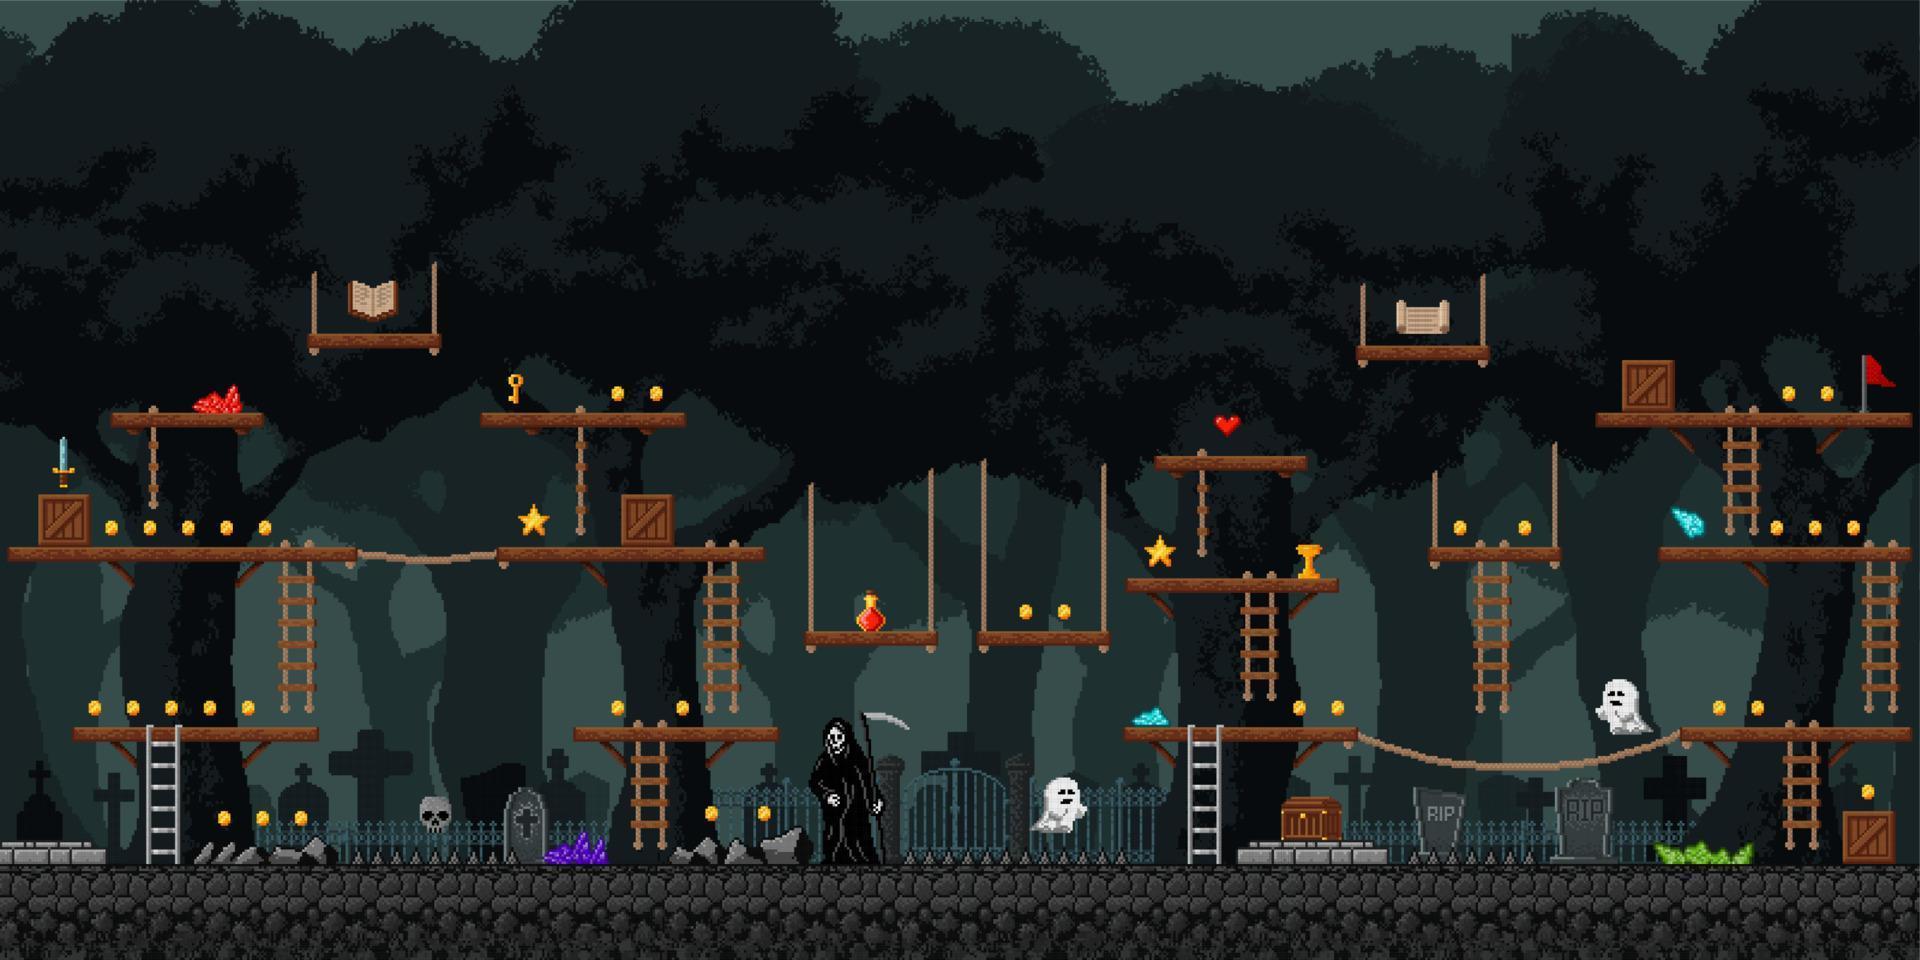 Night forest, cemetery game level screen interface vector